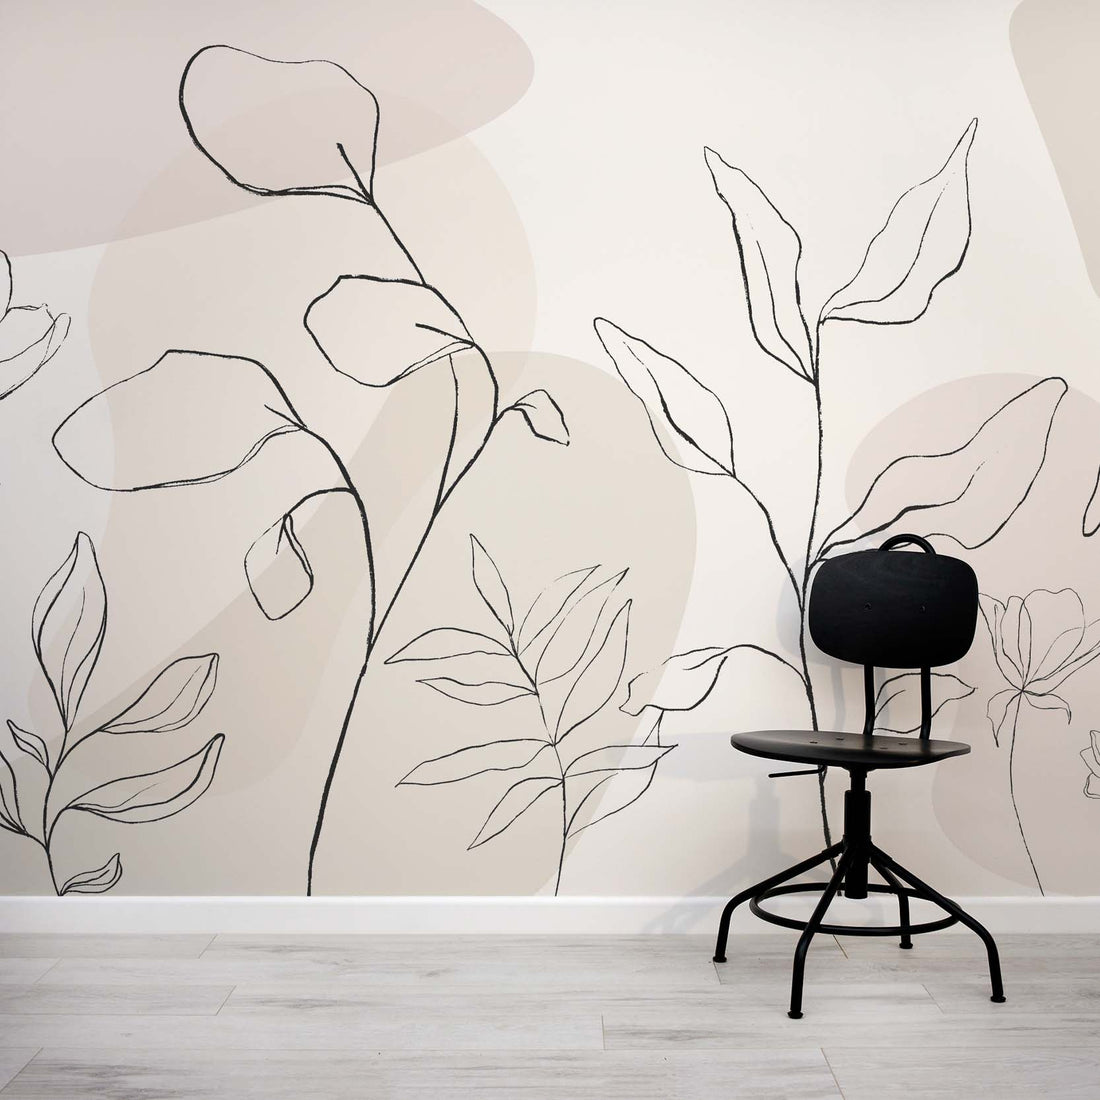 Dusty Botany beige abstract wall mural with outlined leaves by WallpaperMural